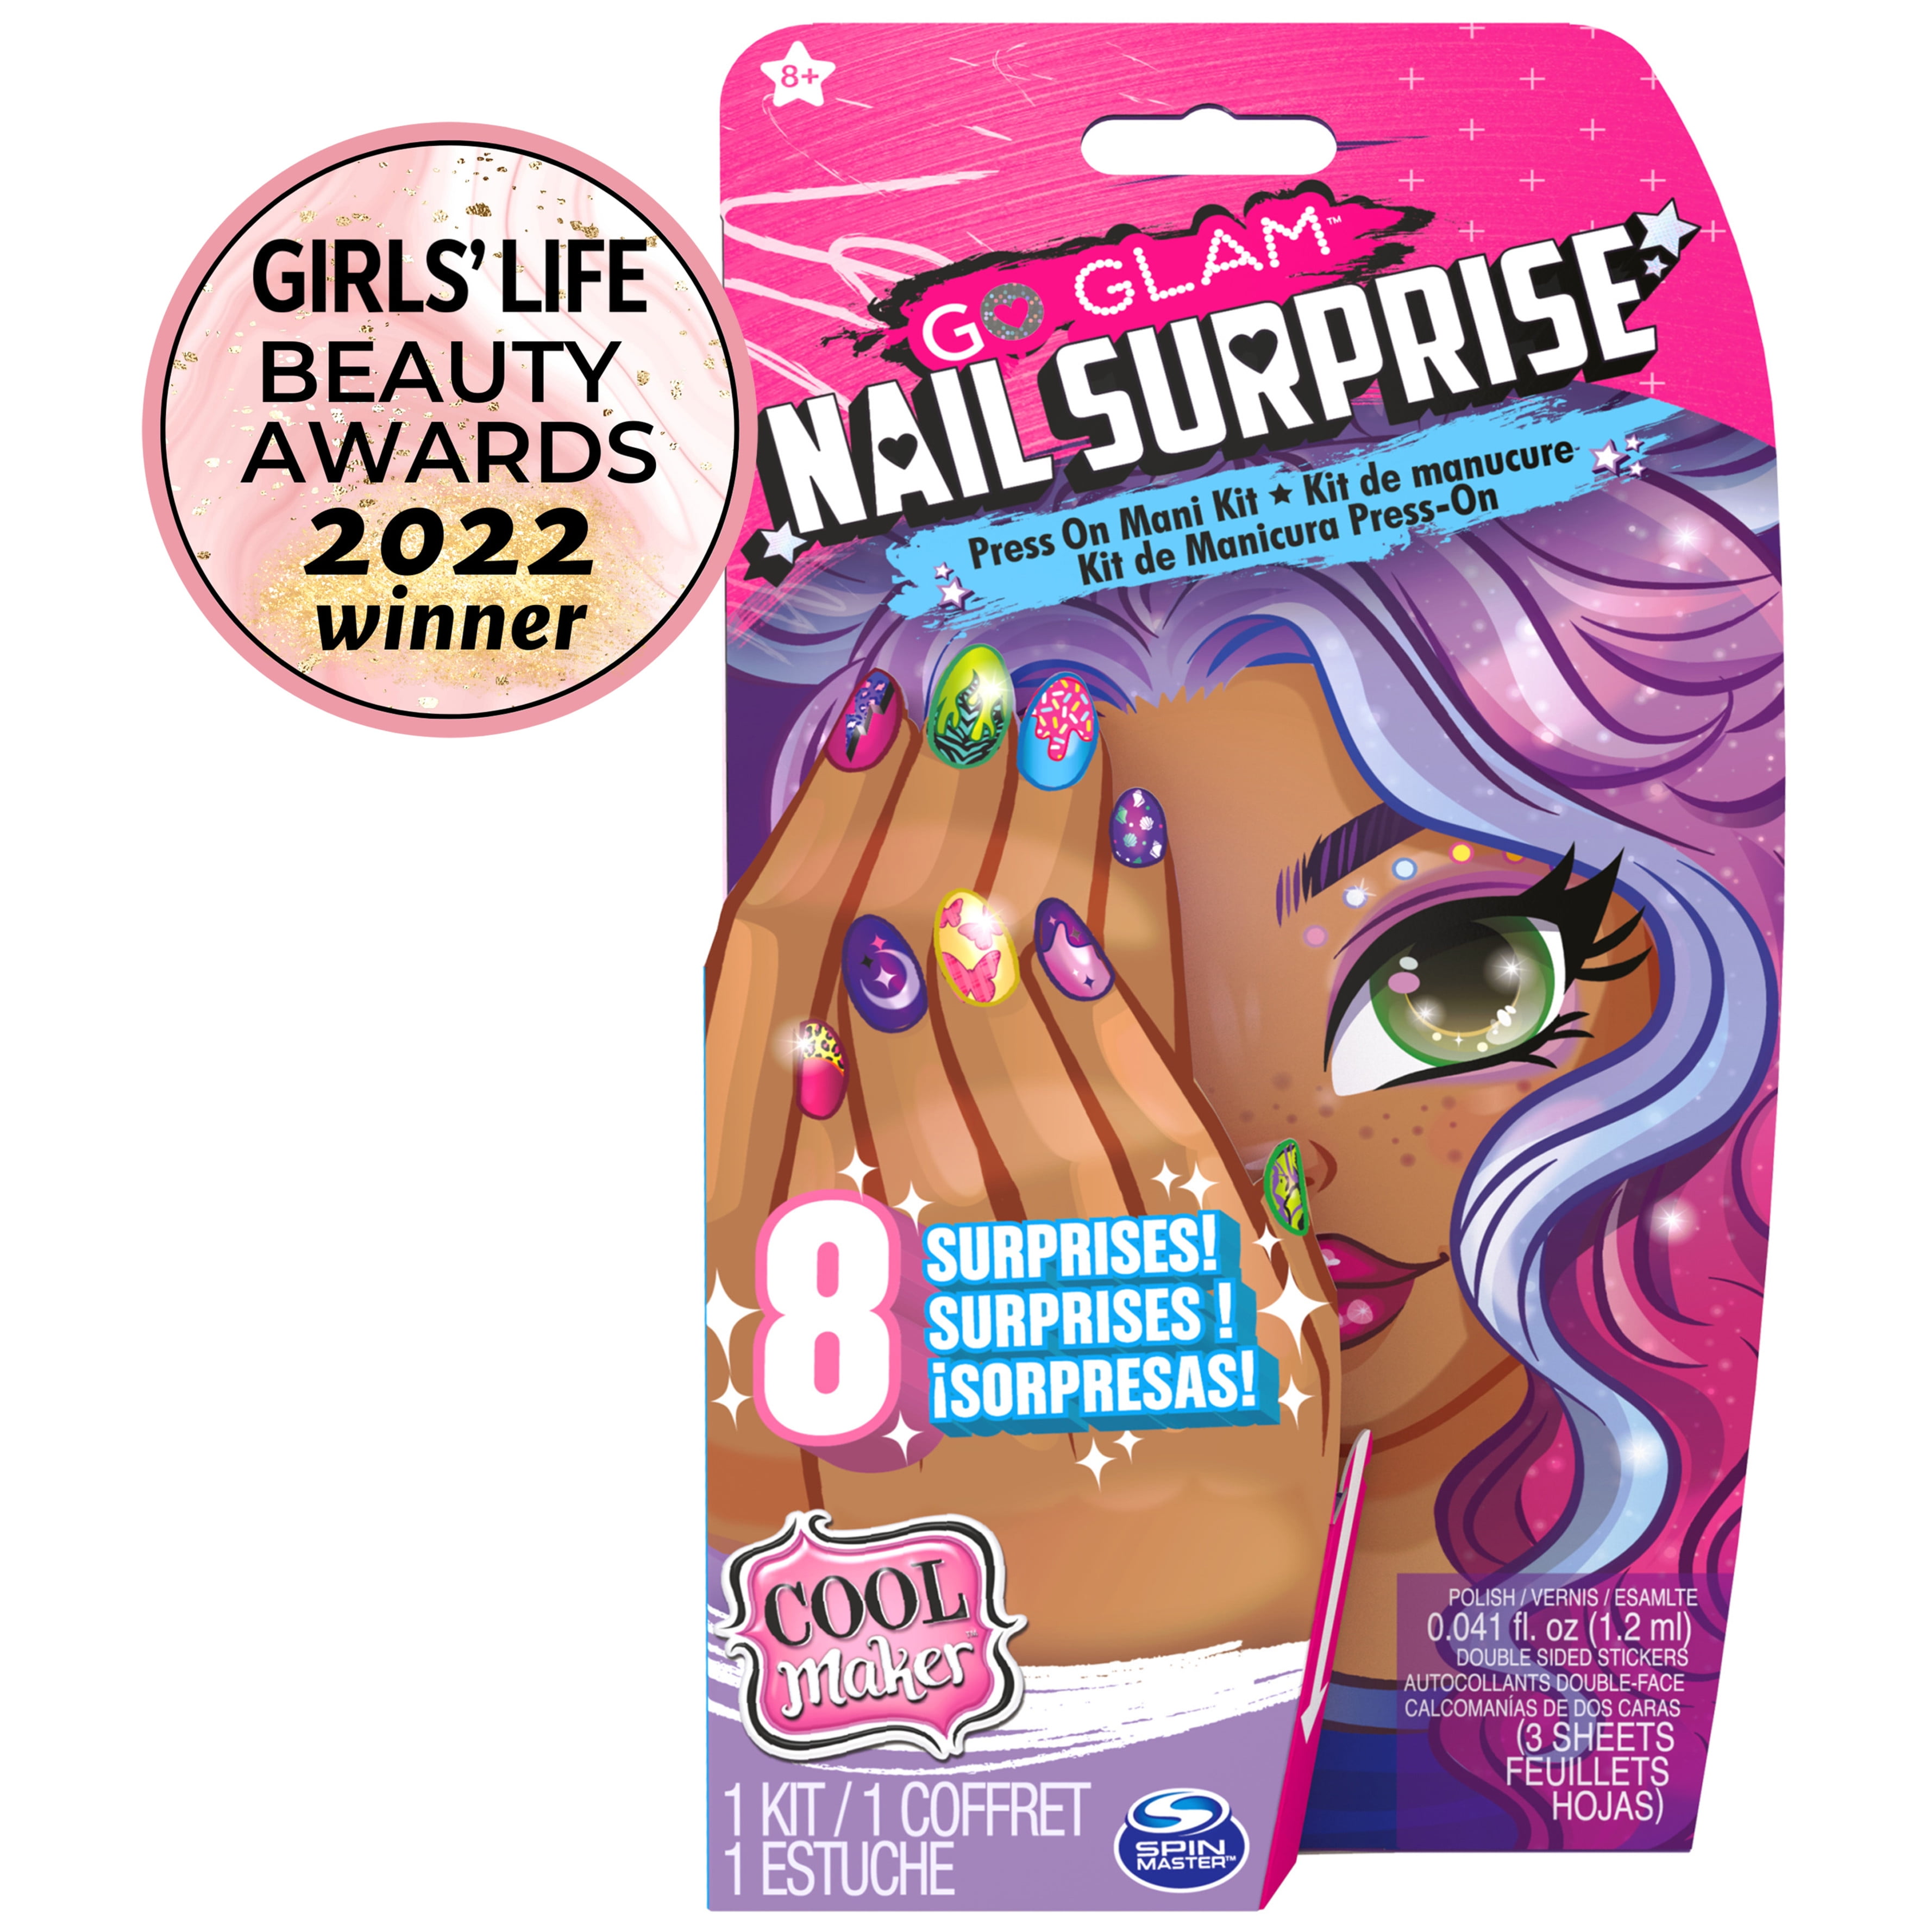 Cool Maker Go Glam U-Nique Nail Salon Mani-Pedi Set from Spin Master  Instructions + Review! 